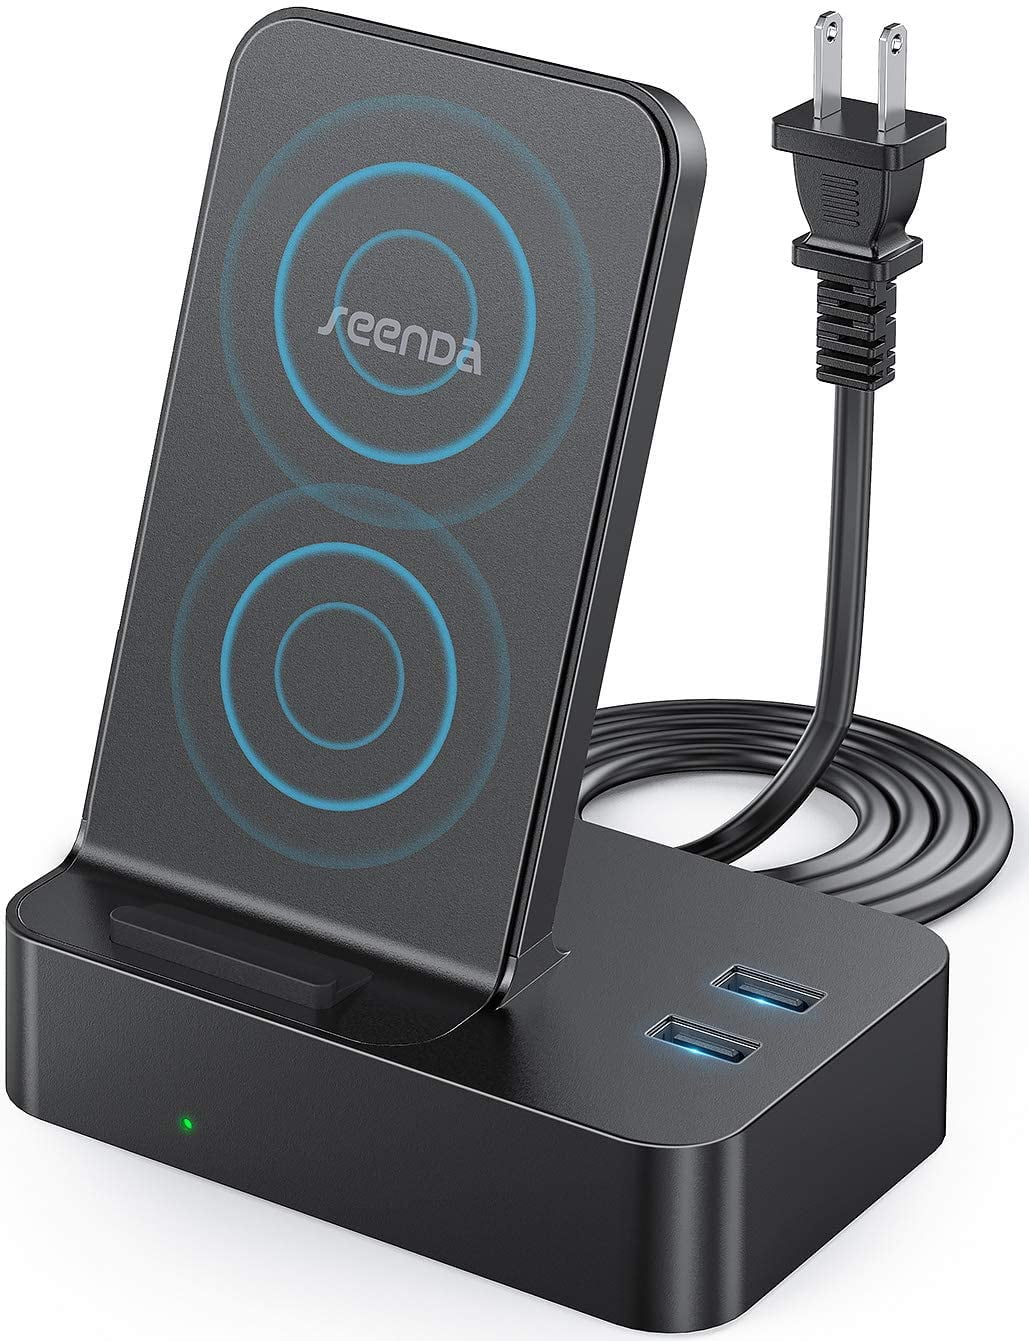 seenda Wireless Charger with 2 USB Ports, 26W 3-in-1 Multi-Device Wireless  Charging Stand Station Built-in AC Adapter, for iPhone 11, 11 Pro, XS Max,  XR, XS, X, 8 Plus, Galaxy S20, S10,